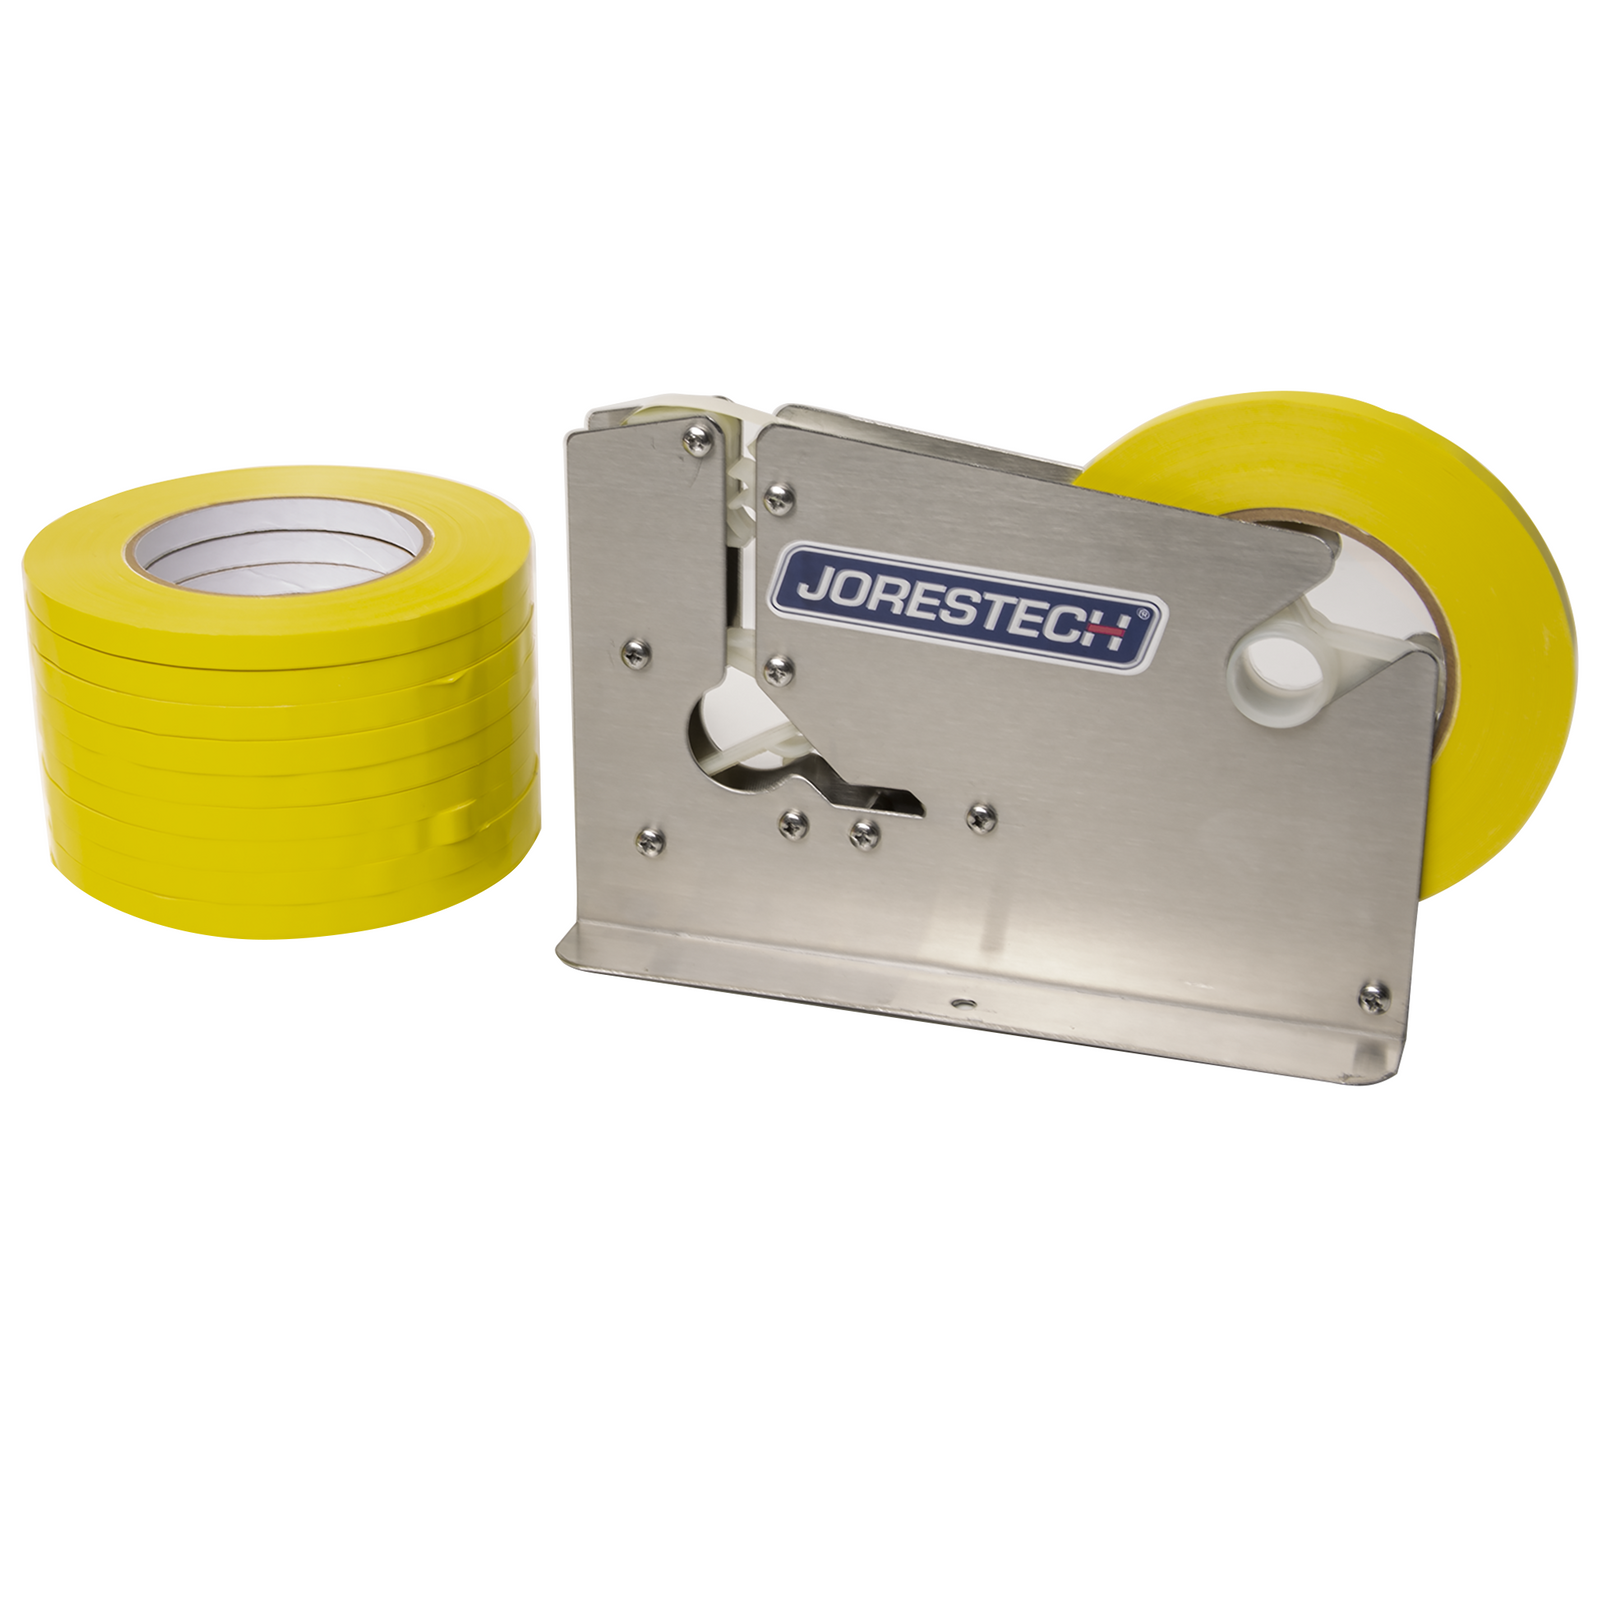 A stainless steel bag closer next to 10 adhesive yellow tape rolls